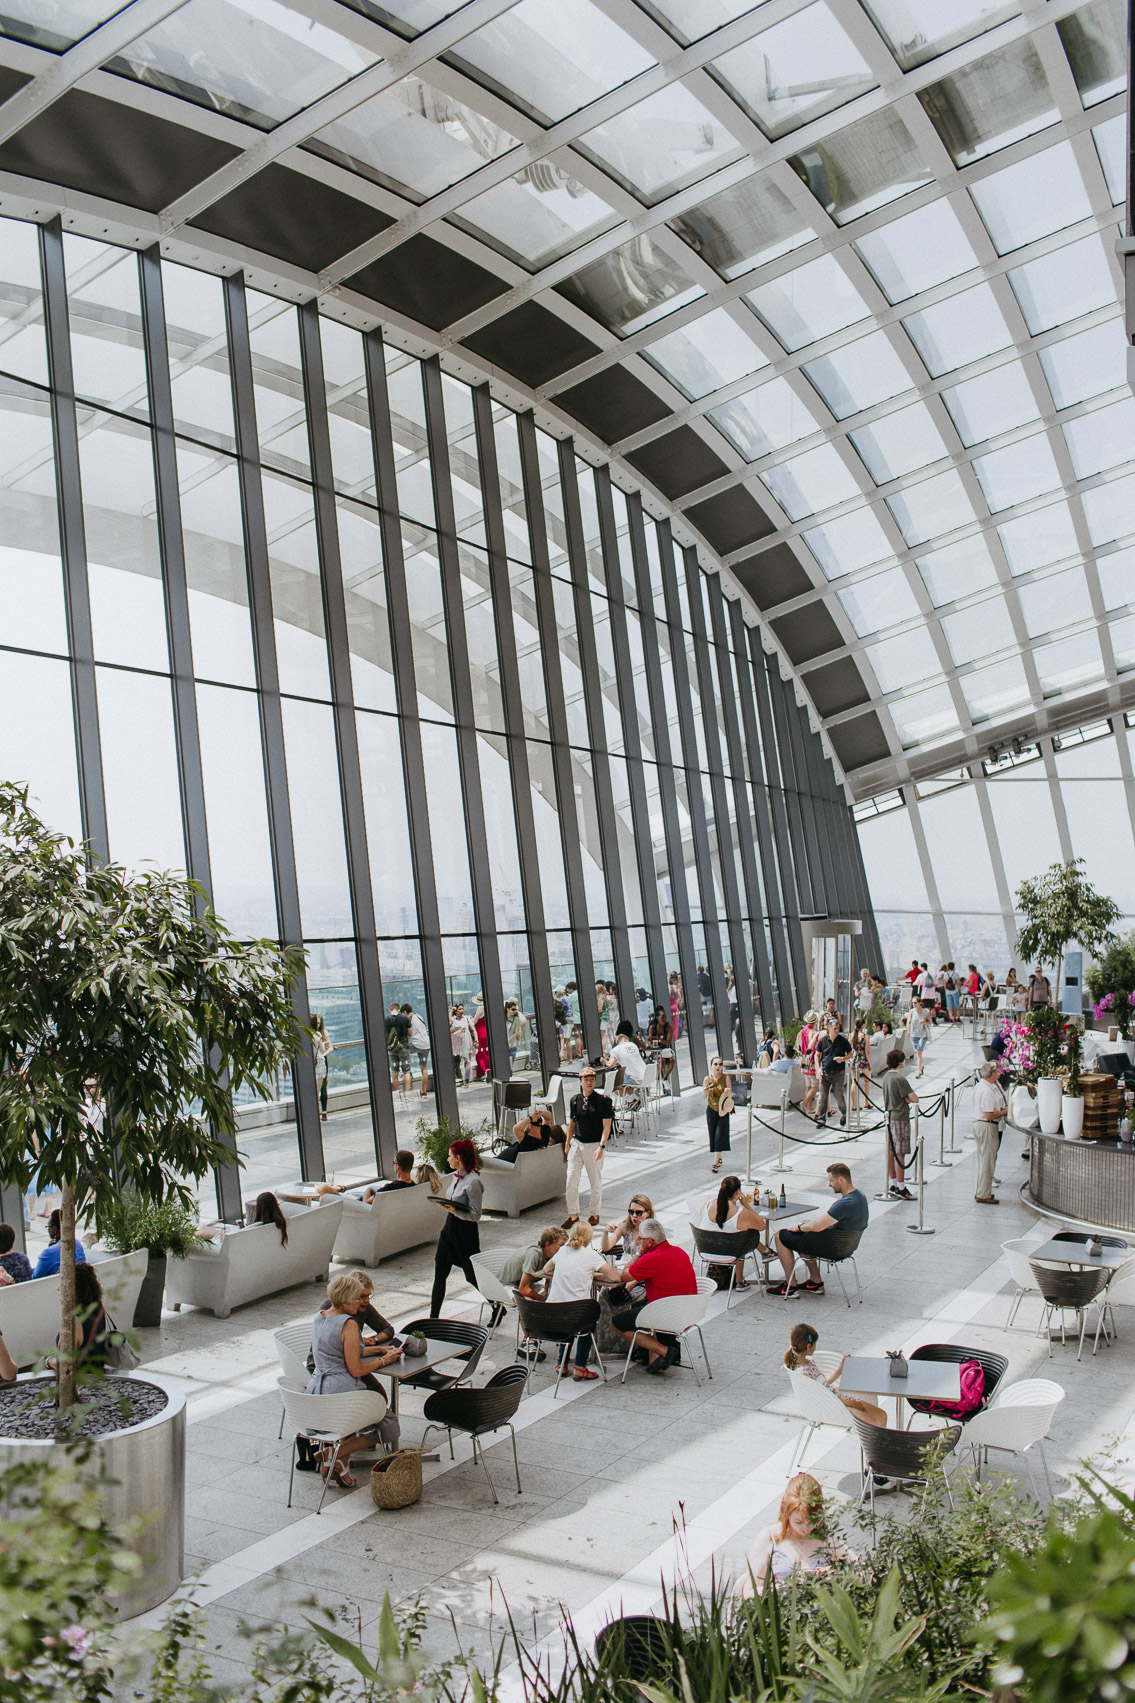 Sky Garden London - The cat, you and us